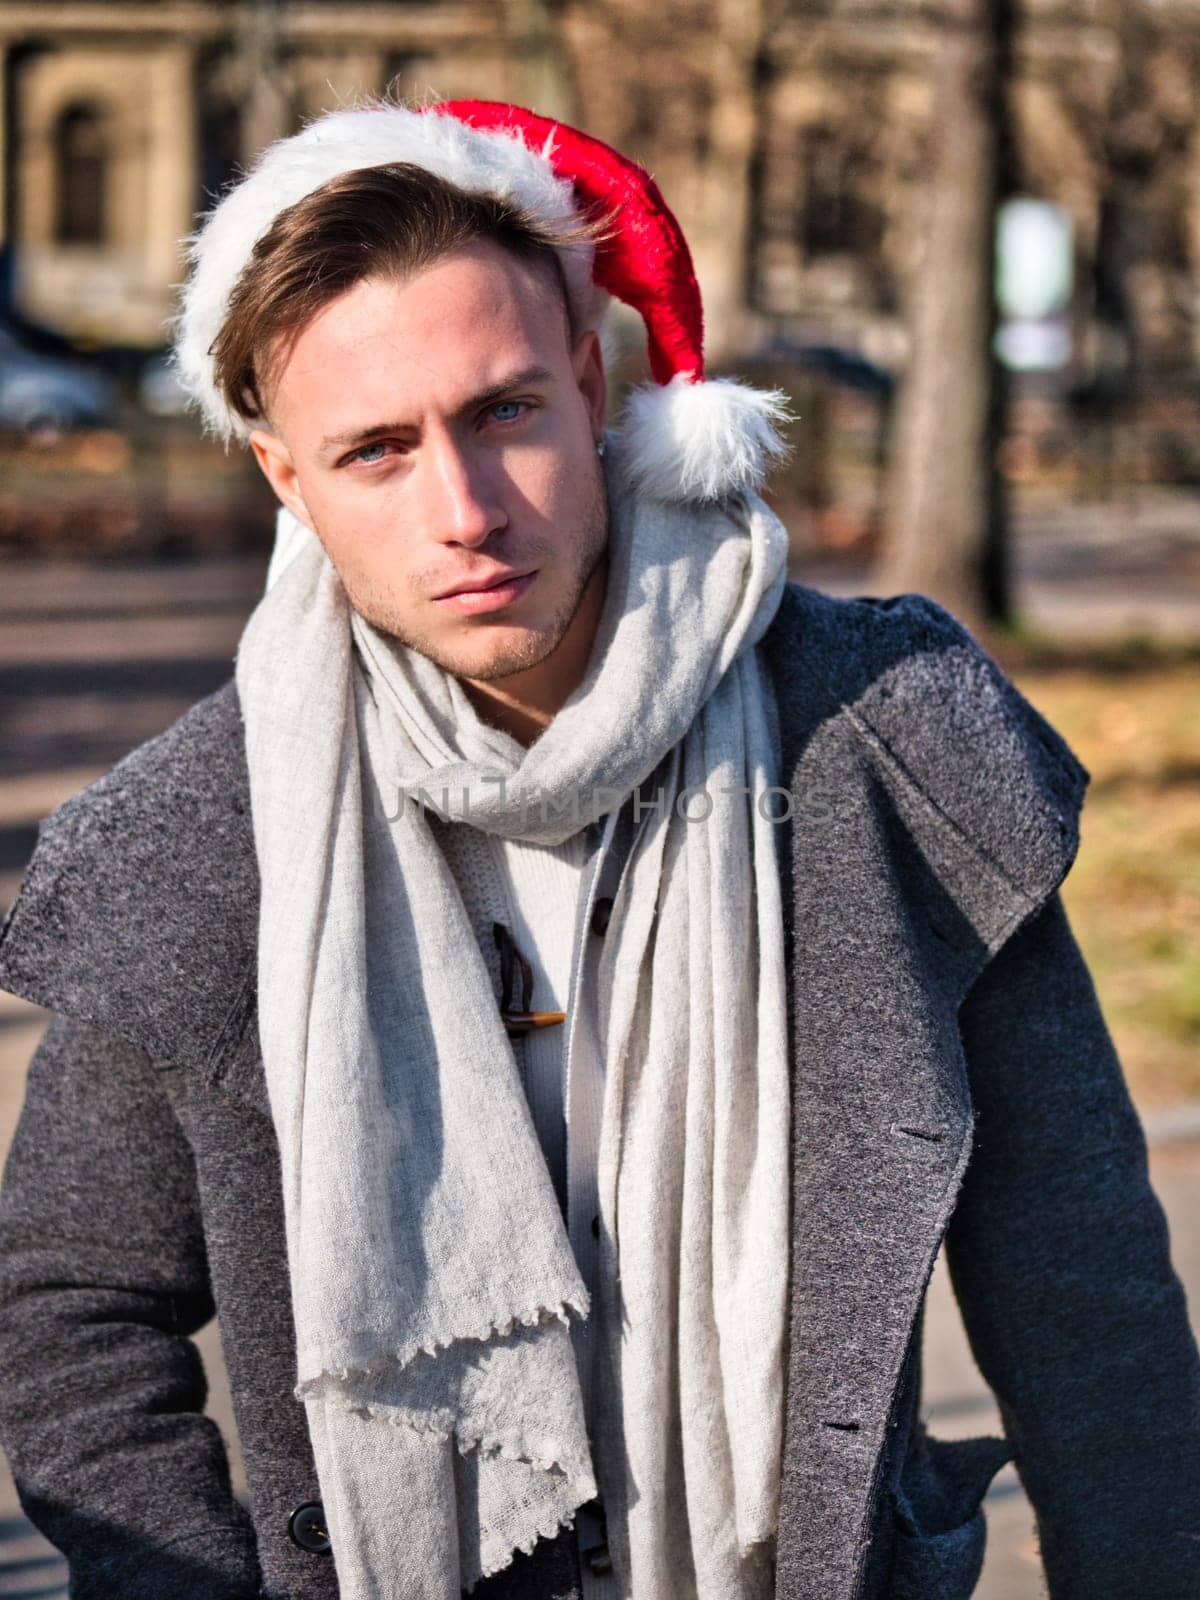 Young Handsome Man in Santa Claus Hat on Street by artofphoto